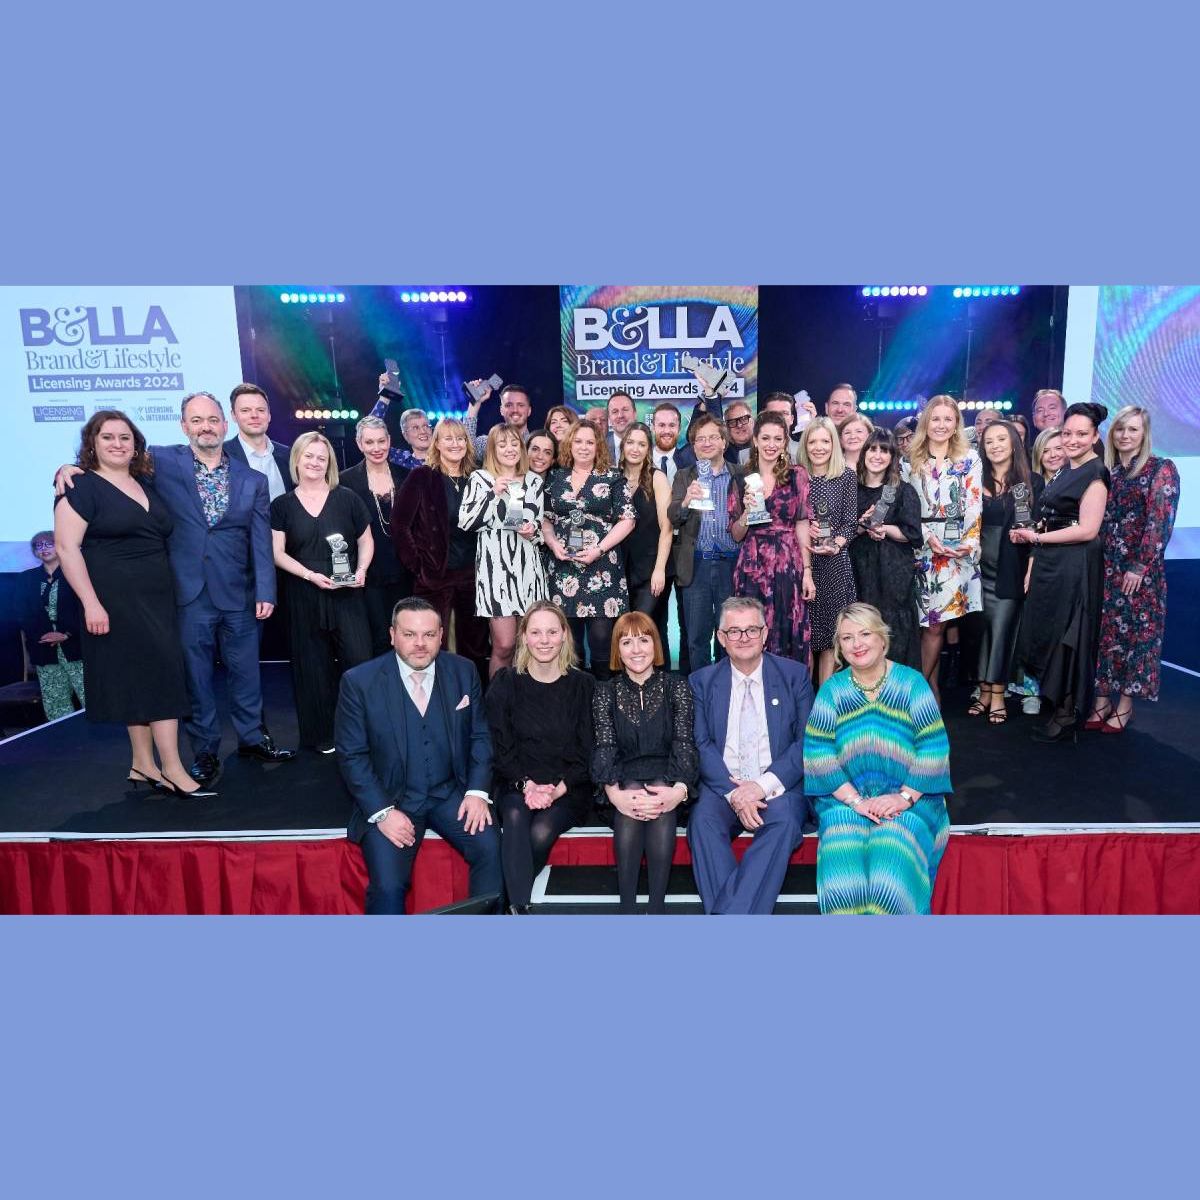 UK Brand & Lifestyle Licensing Awards 2024: The Winners